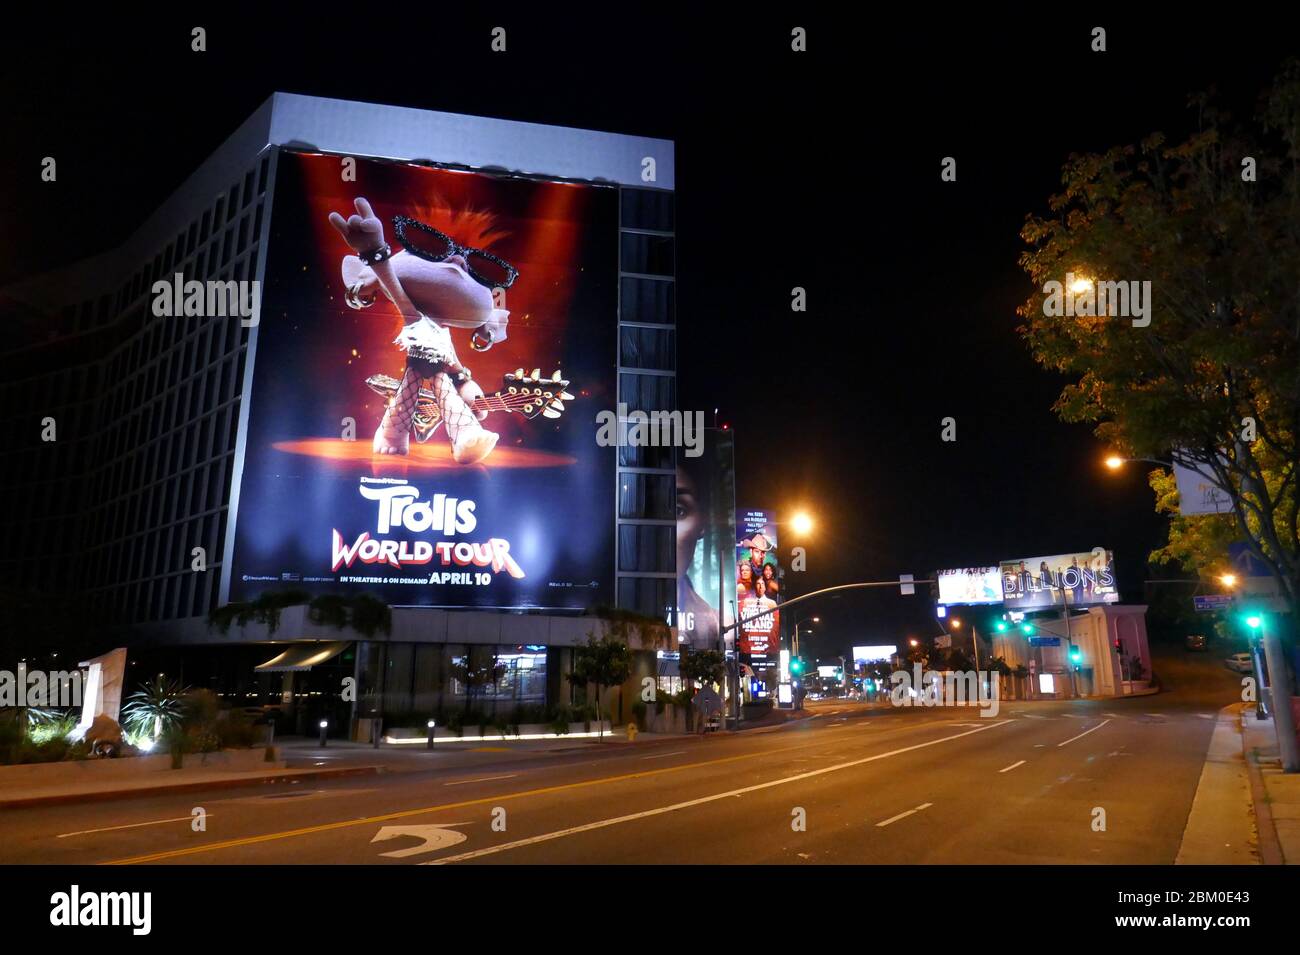 Los Angeles, California, USA 5th May 2020 A general view of atmosphere of Trolls World Tour billboard on empty Sunset Blvd during Coronavirus Covid-19 Pandemic on May 5, 2020 in Los Angeles, California, USA. Photo by Barry King/Alamy Stock Photo Stock Photo